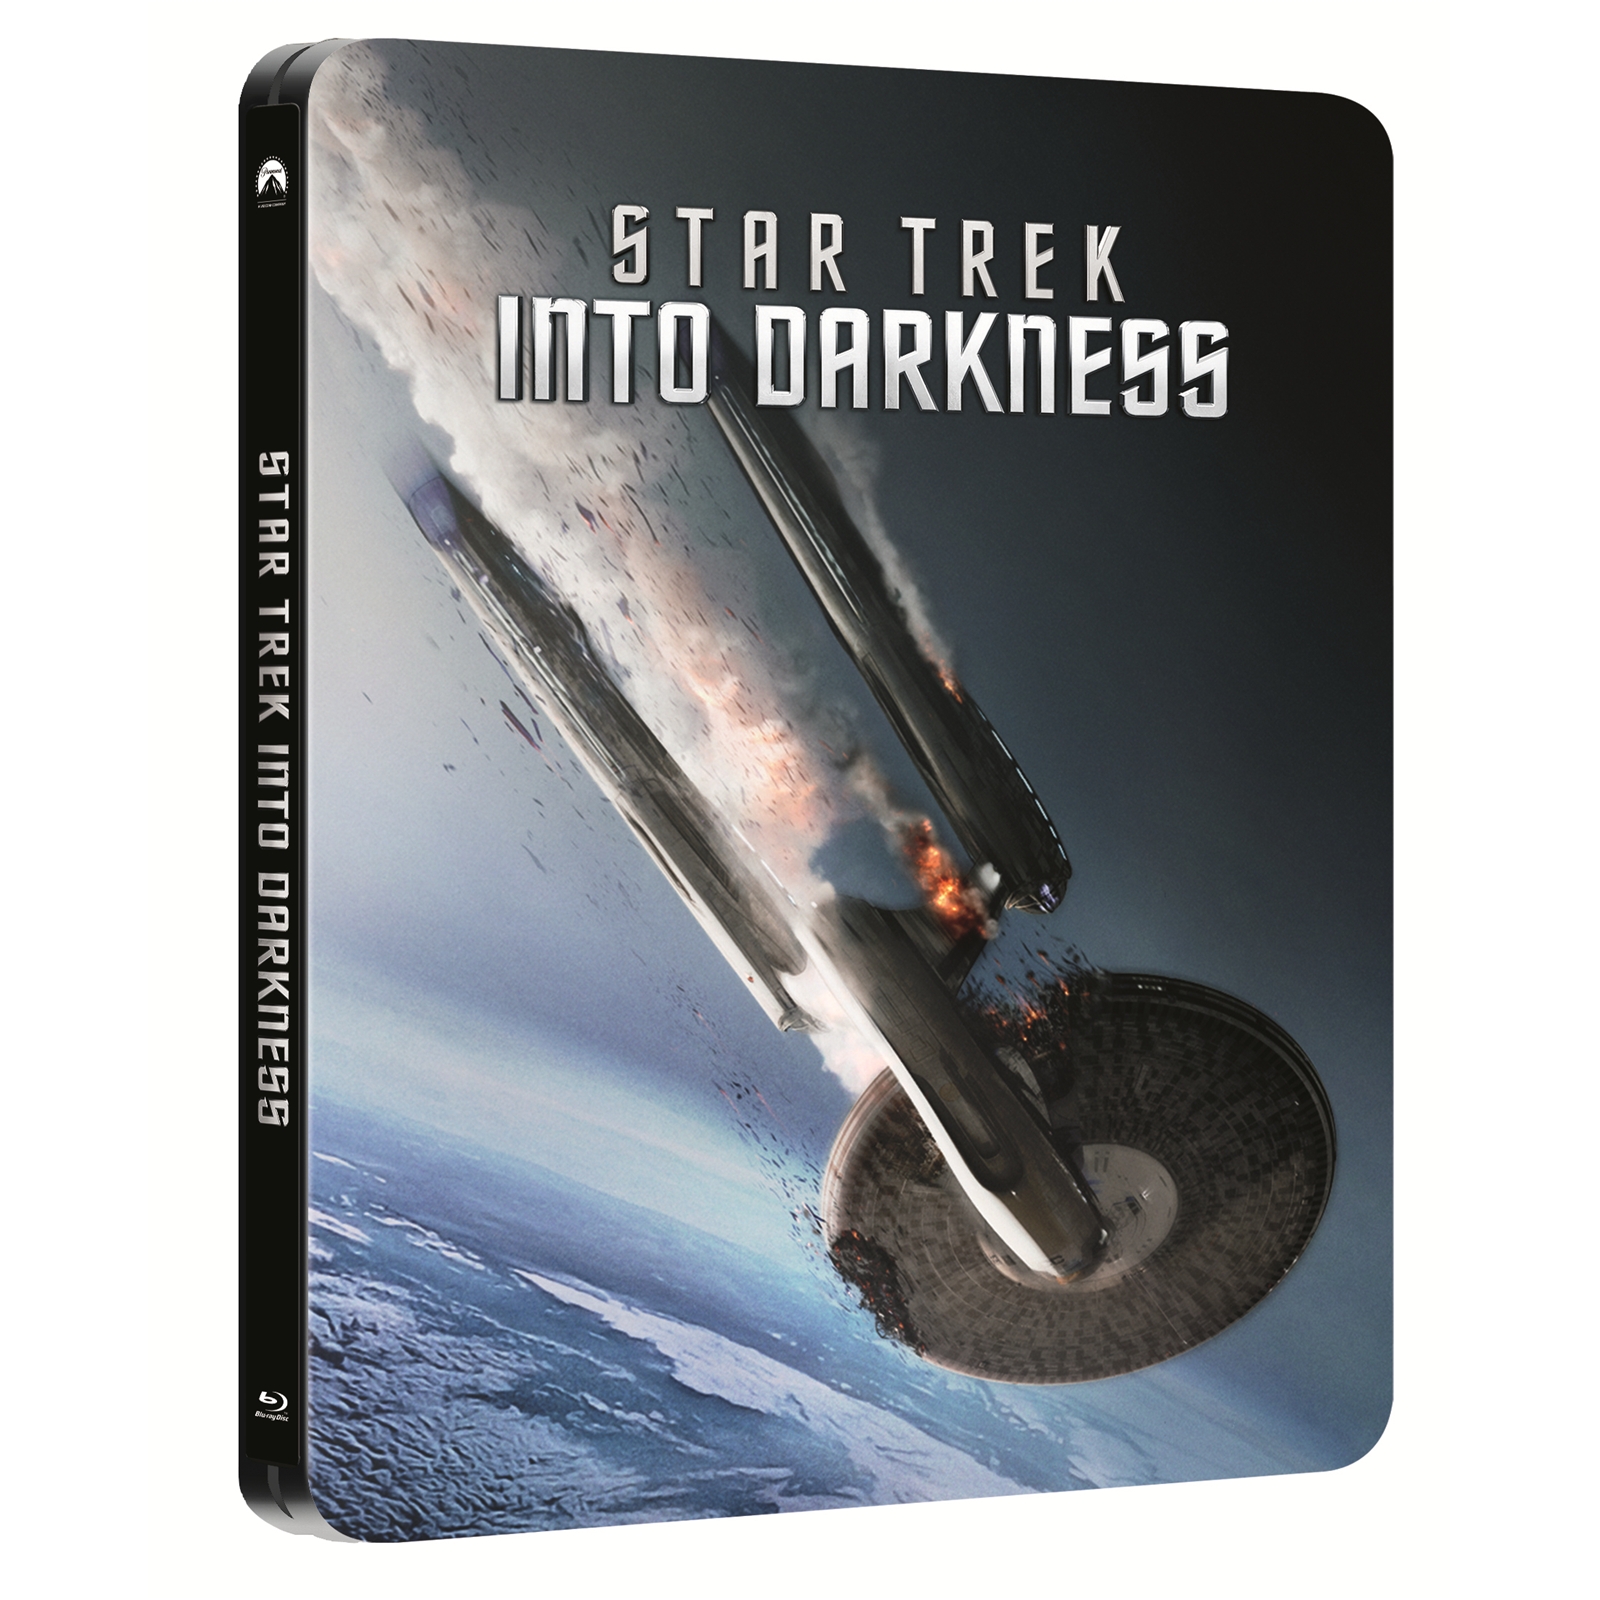 More UK Star Trek Into Darkness Steelbook choices with a couple of Entertai...